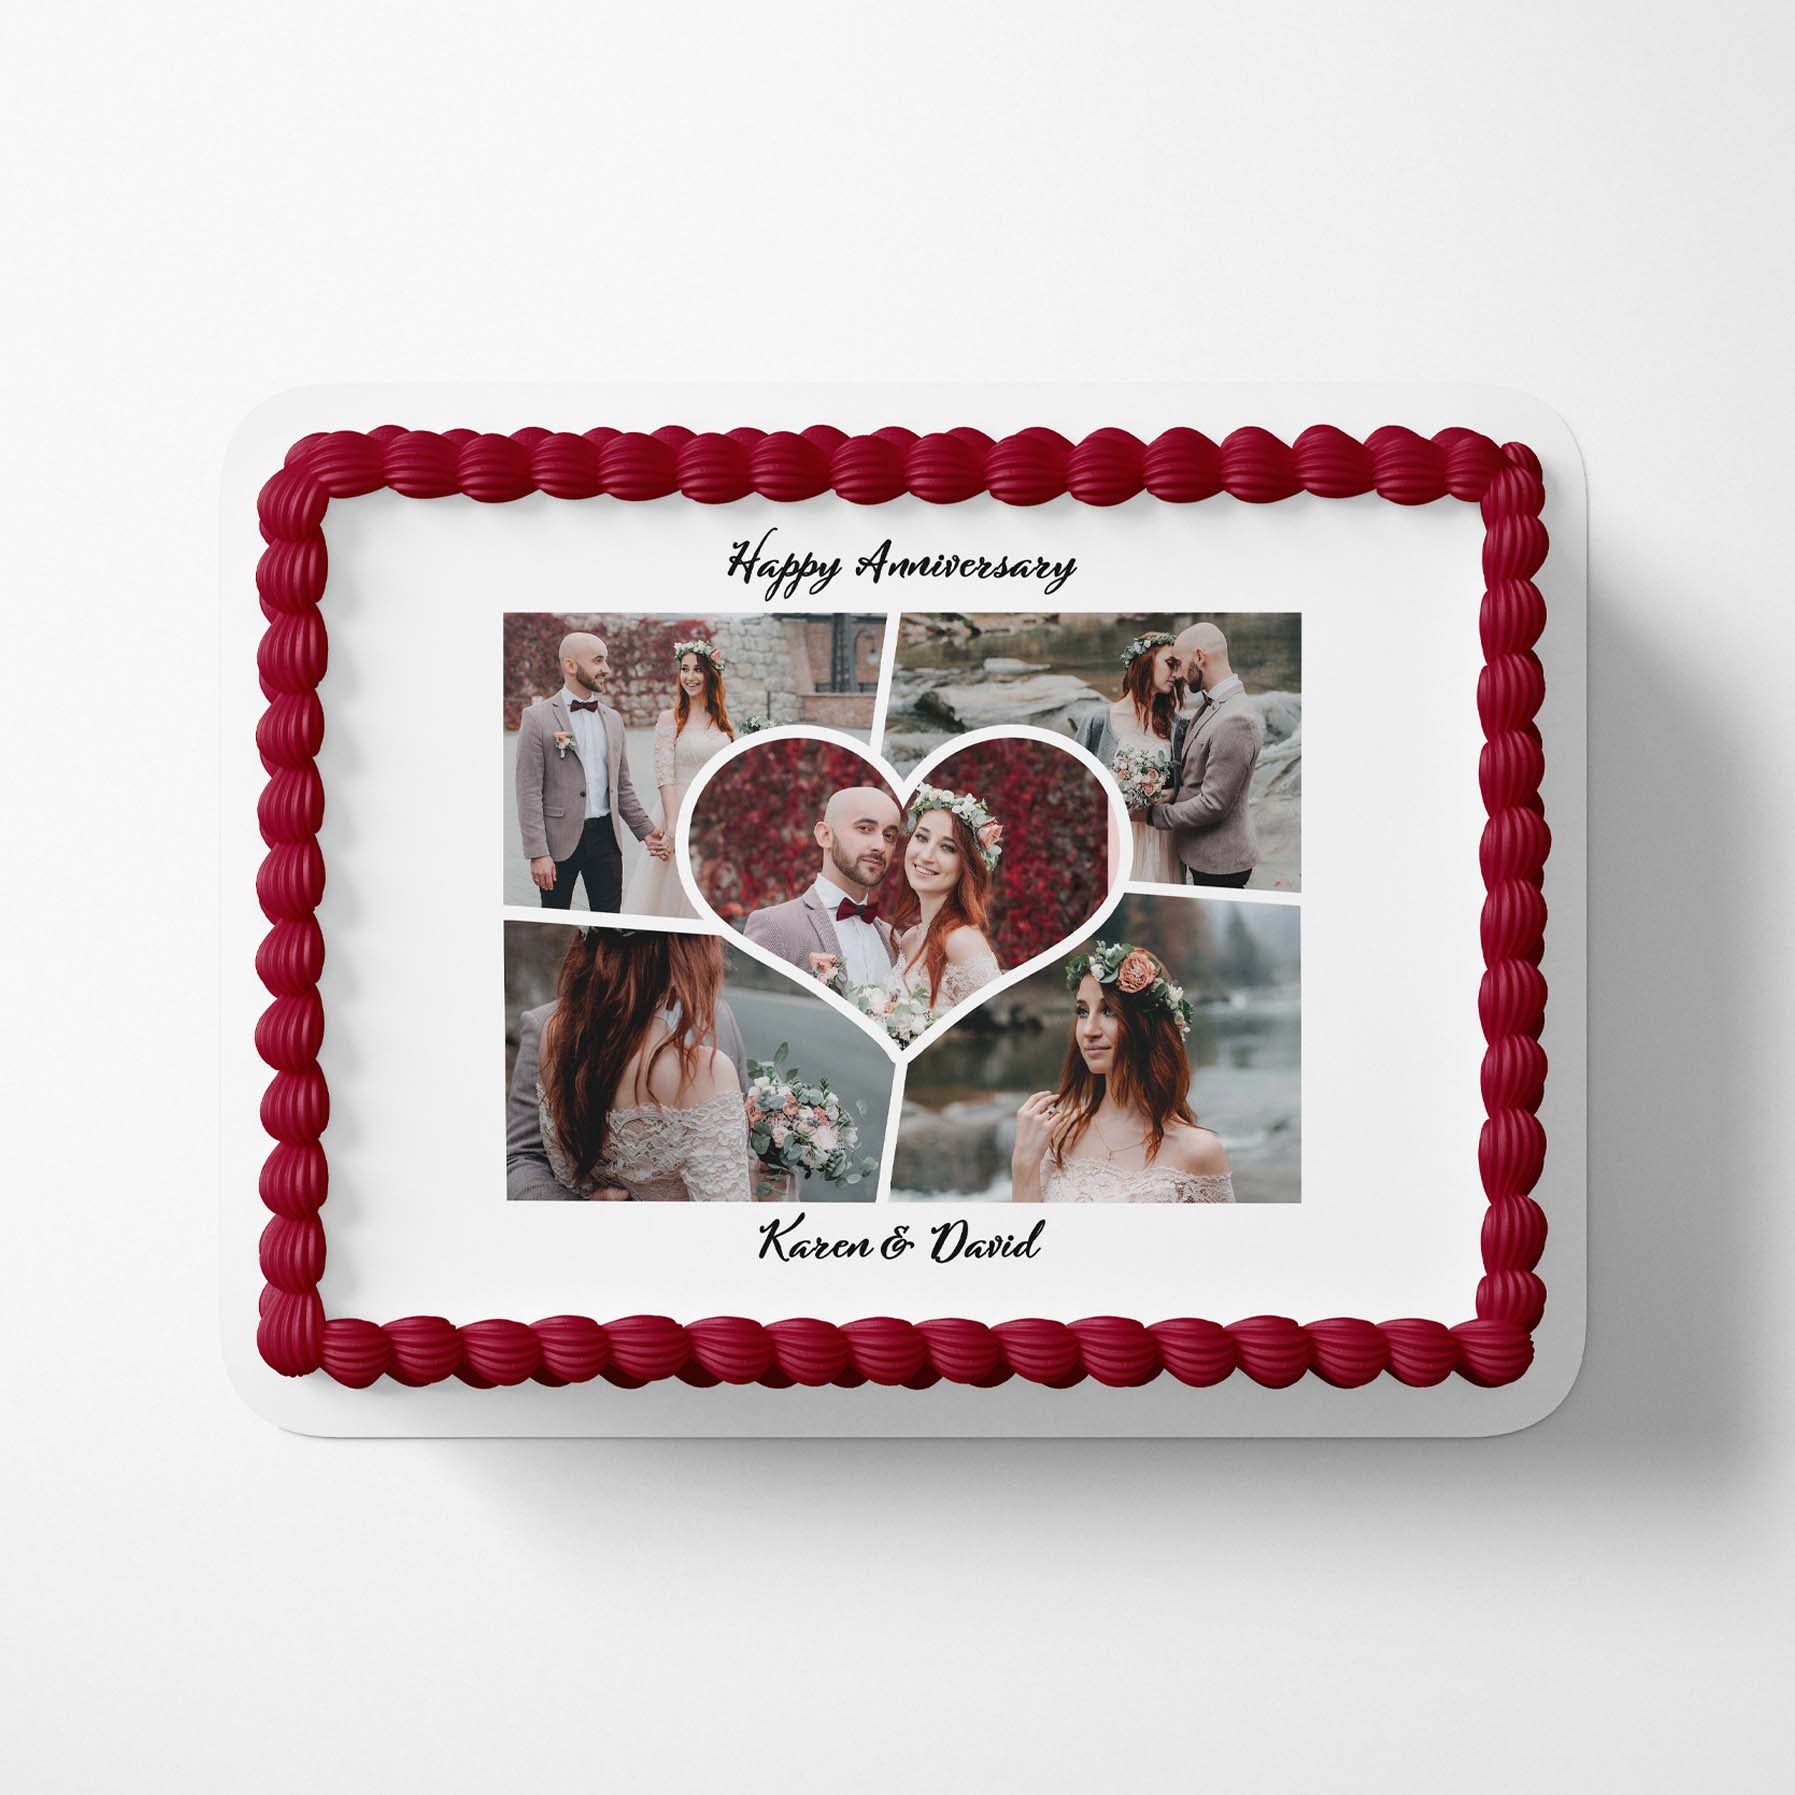 Heart Frame Photo Collage cake edible image prints on cakes